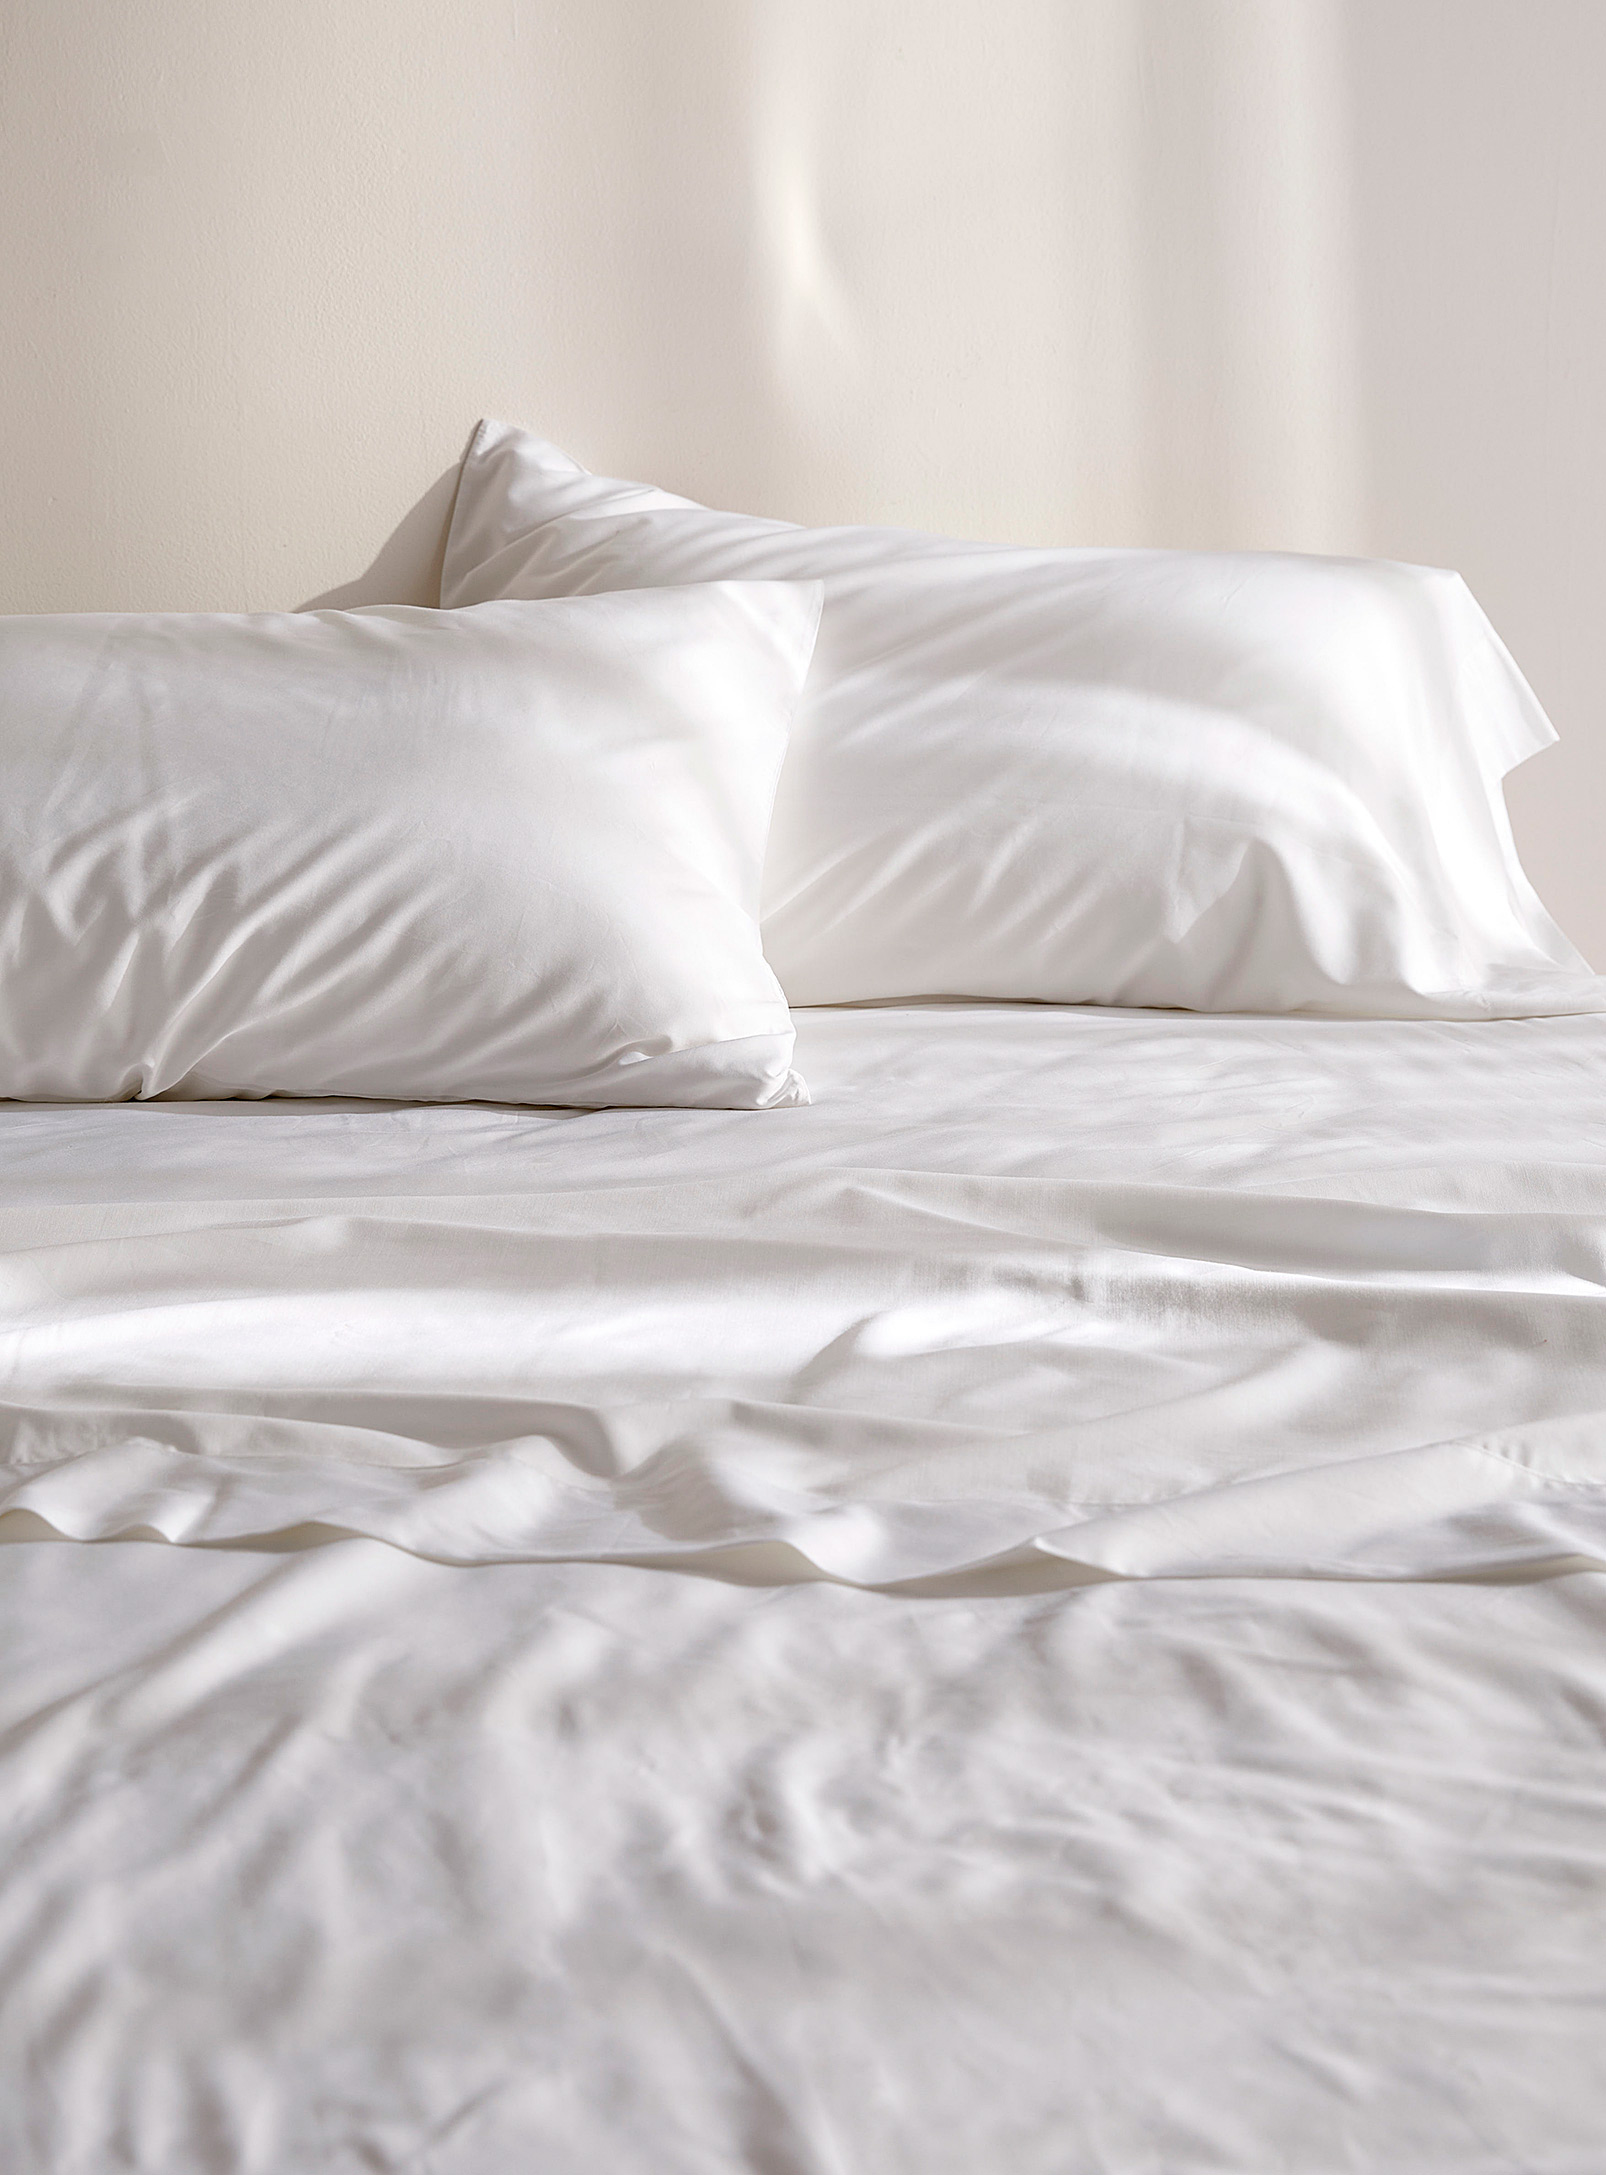 Simons Maison Bamboo Rayon And Cotton 300-thread-count Sheet Set Fits Mattresses Up To 16 In In White